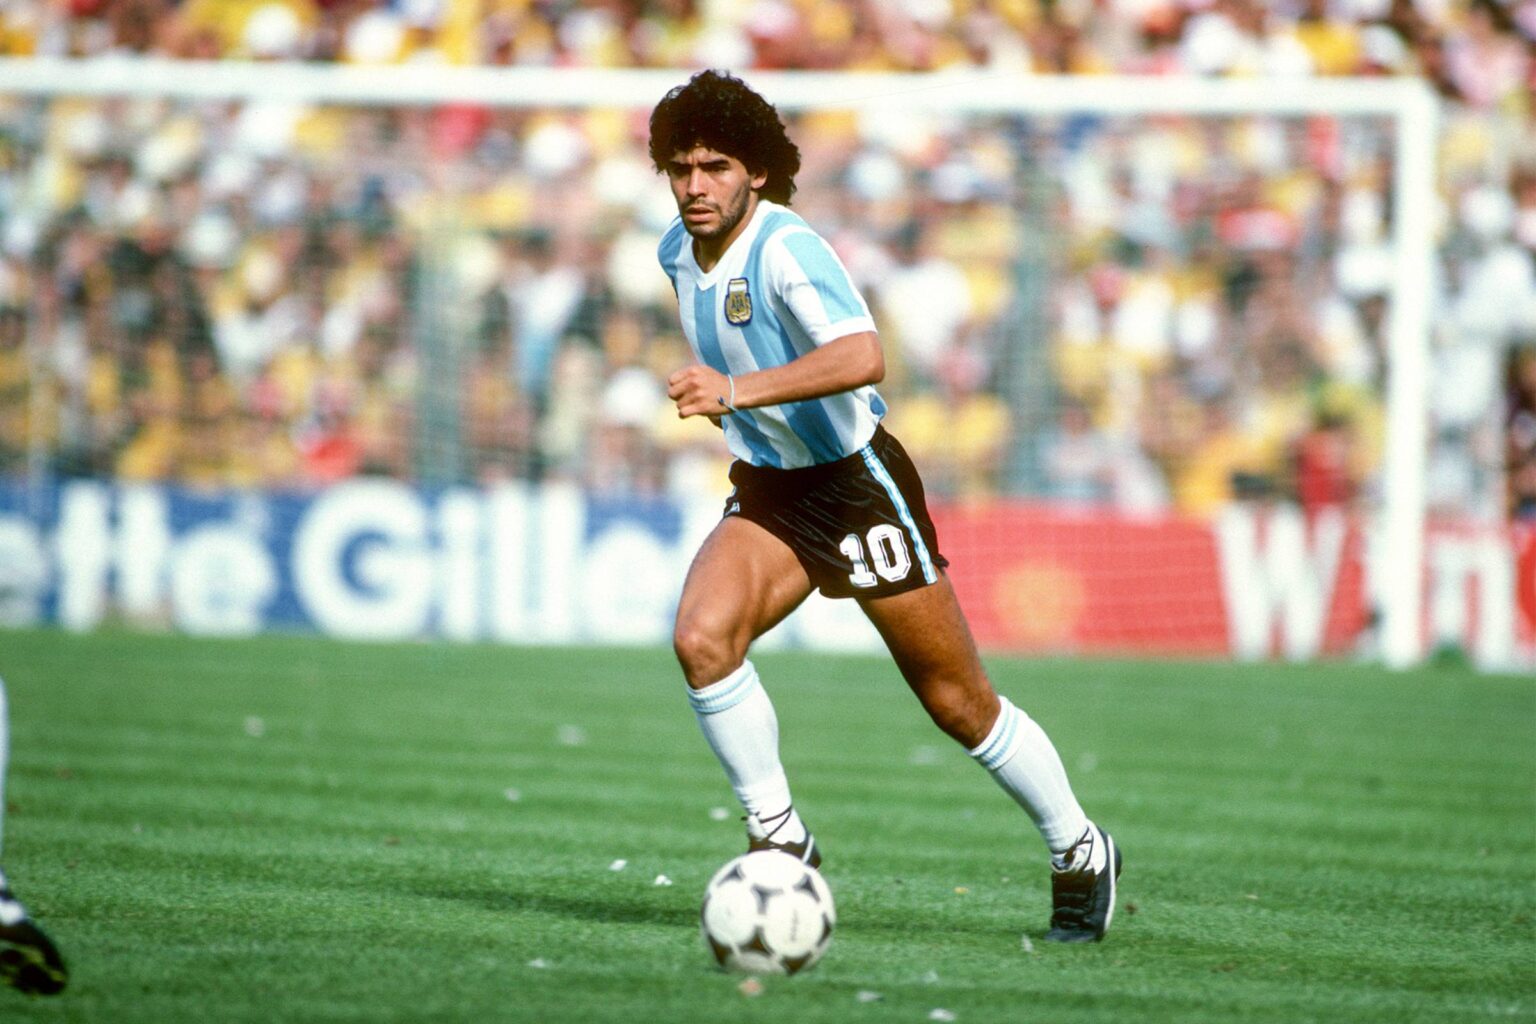 Diego Maradona suffered a cardiac arrest in his family home in Tigre, Argentina. Let's look back at his football career.